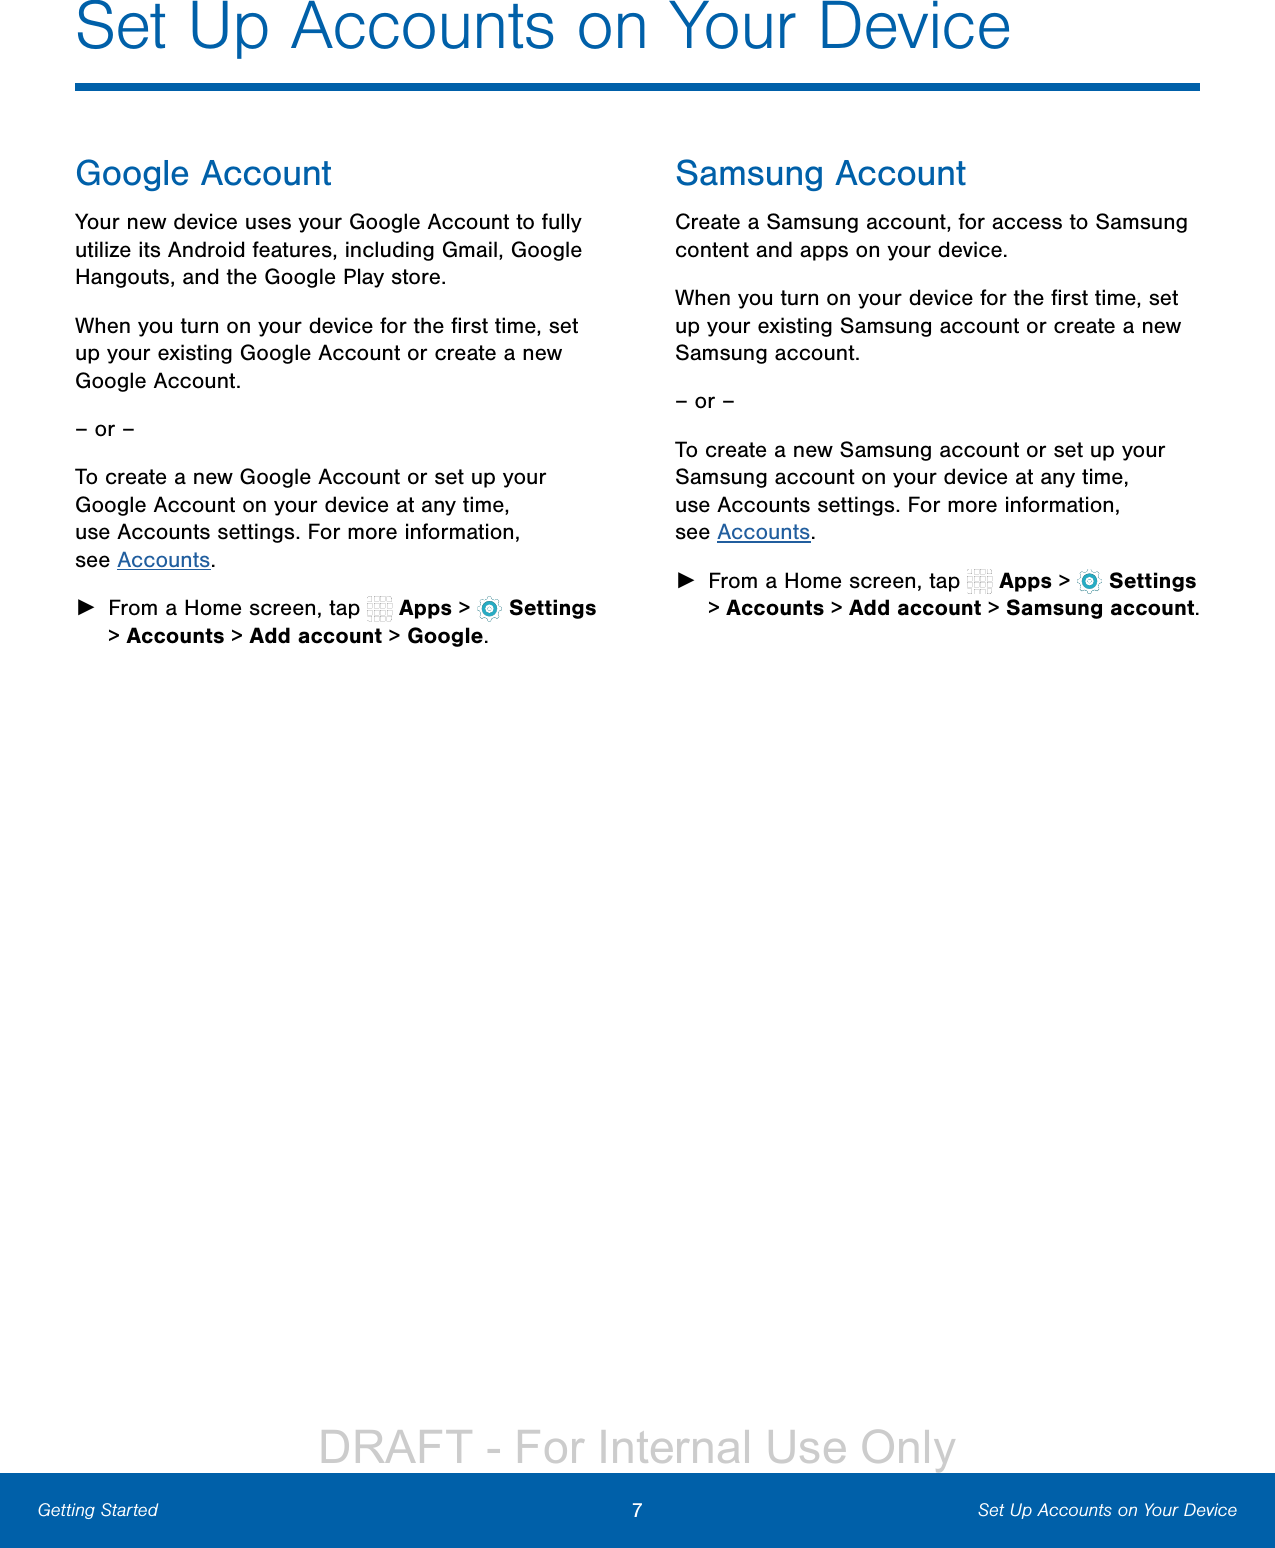 7Set Up Accounts on Your DeviceGetting StartedGoogle AccountYour new device uses your Google Account to fully utilize its Android features, including Gmail, Google Hangouts, and the Google Play store.When you turn on your device for the ﬁrst time, set up your existing Google Account or create a new Google Account.– or –To create a new Google Account or set up your Google Account on your device at any time, use Accounts settings. Formore information, seeAccounts. ►From a Home screen, tap   Apps &gt;  Settings &gt; Accounts &gt; Add account &gt; Google.Samsung AccountCreate a Samsung account, for access to Samsung content and apps on your device. When you turn on your device for the ﬁrst time, set up your existing Samsung account or create a new Samsung account.– or –To create a new Samsung account or set up your Samsung account on your device at any time, use Accounts settings. Formore information, seeAccounts. ►From a Home screen, tap   Apps &gt;  Settings &gt; Accounts &gt; Add account &gt; Samsungaccount.Set Up Accounts on Your DeviceDRAFT - For Internal Use Only